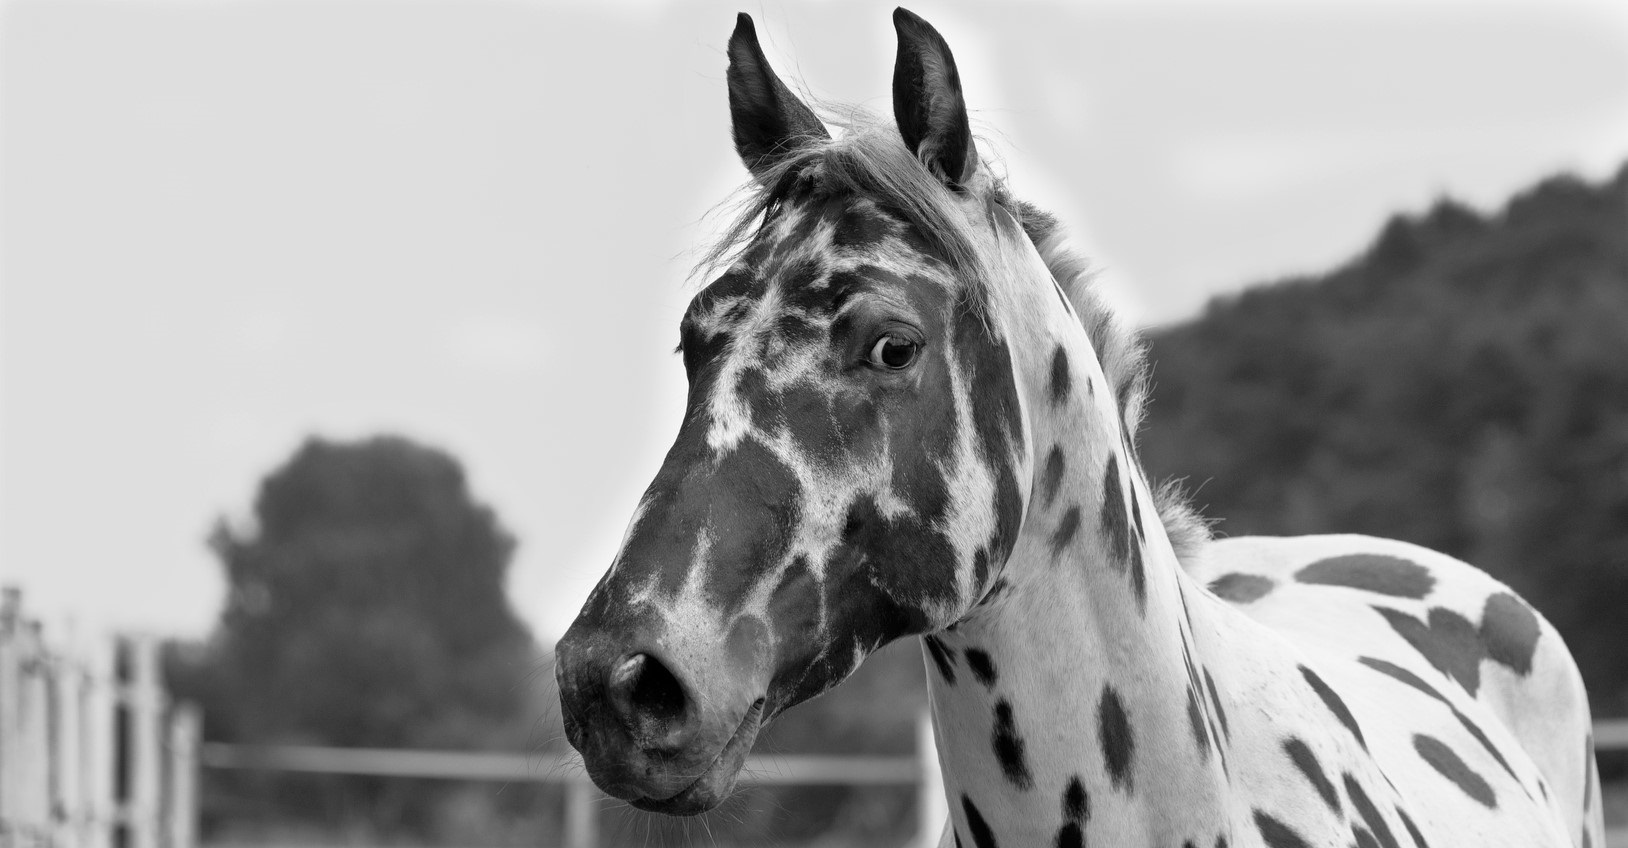 10 Horse Breeds With Spotted Coats You Need to See